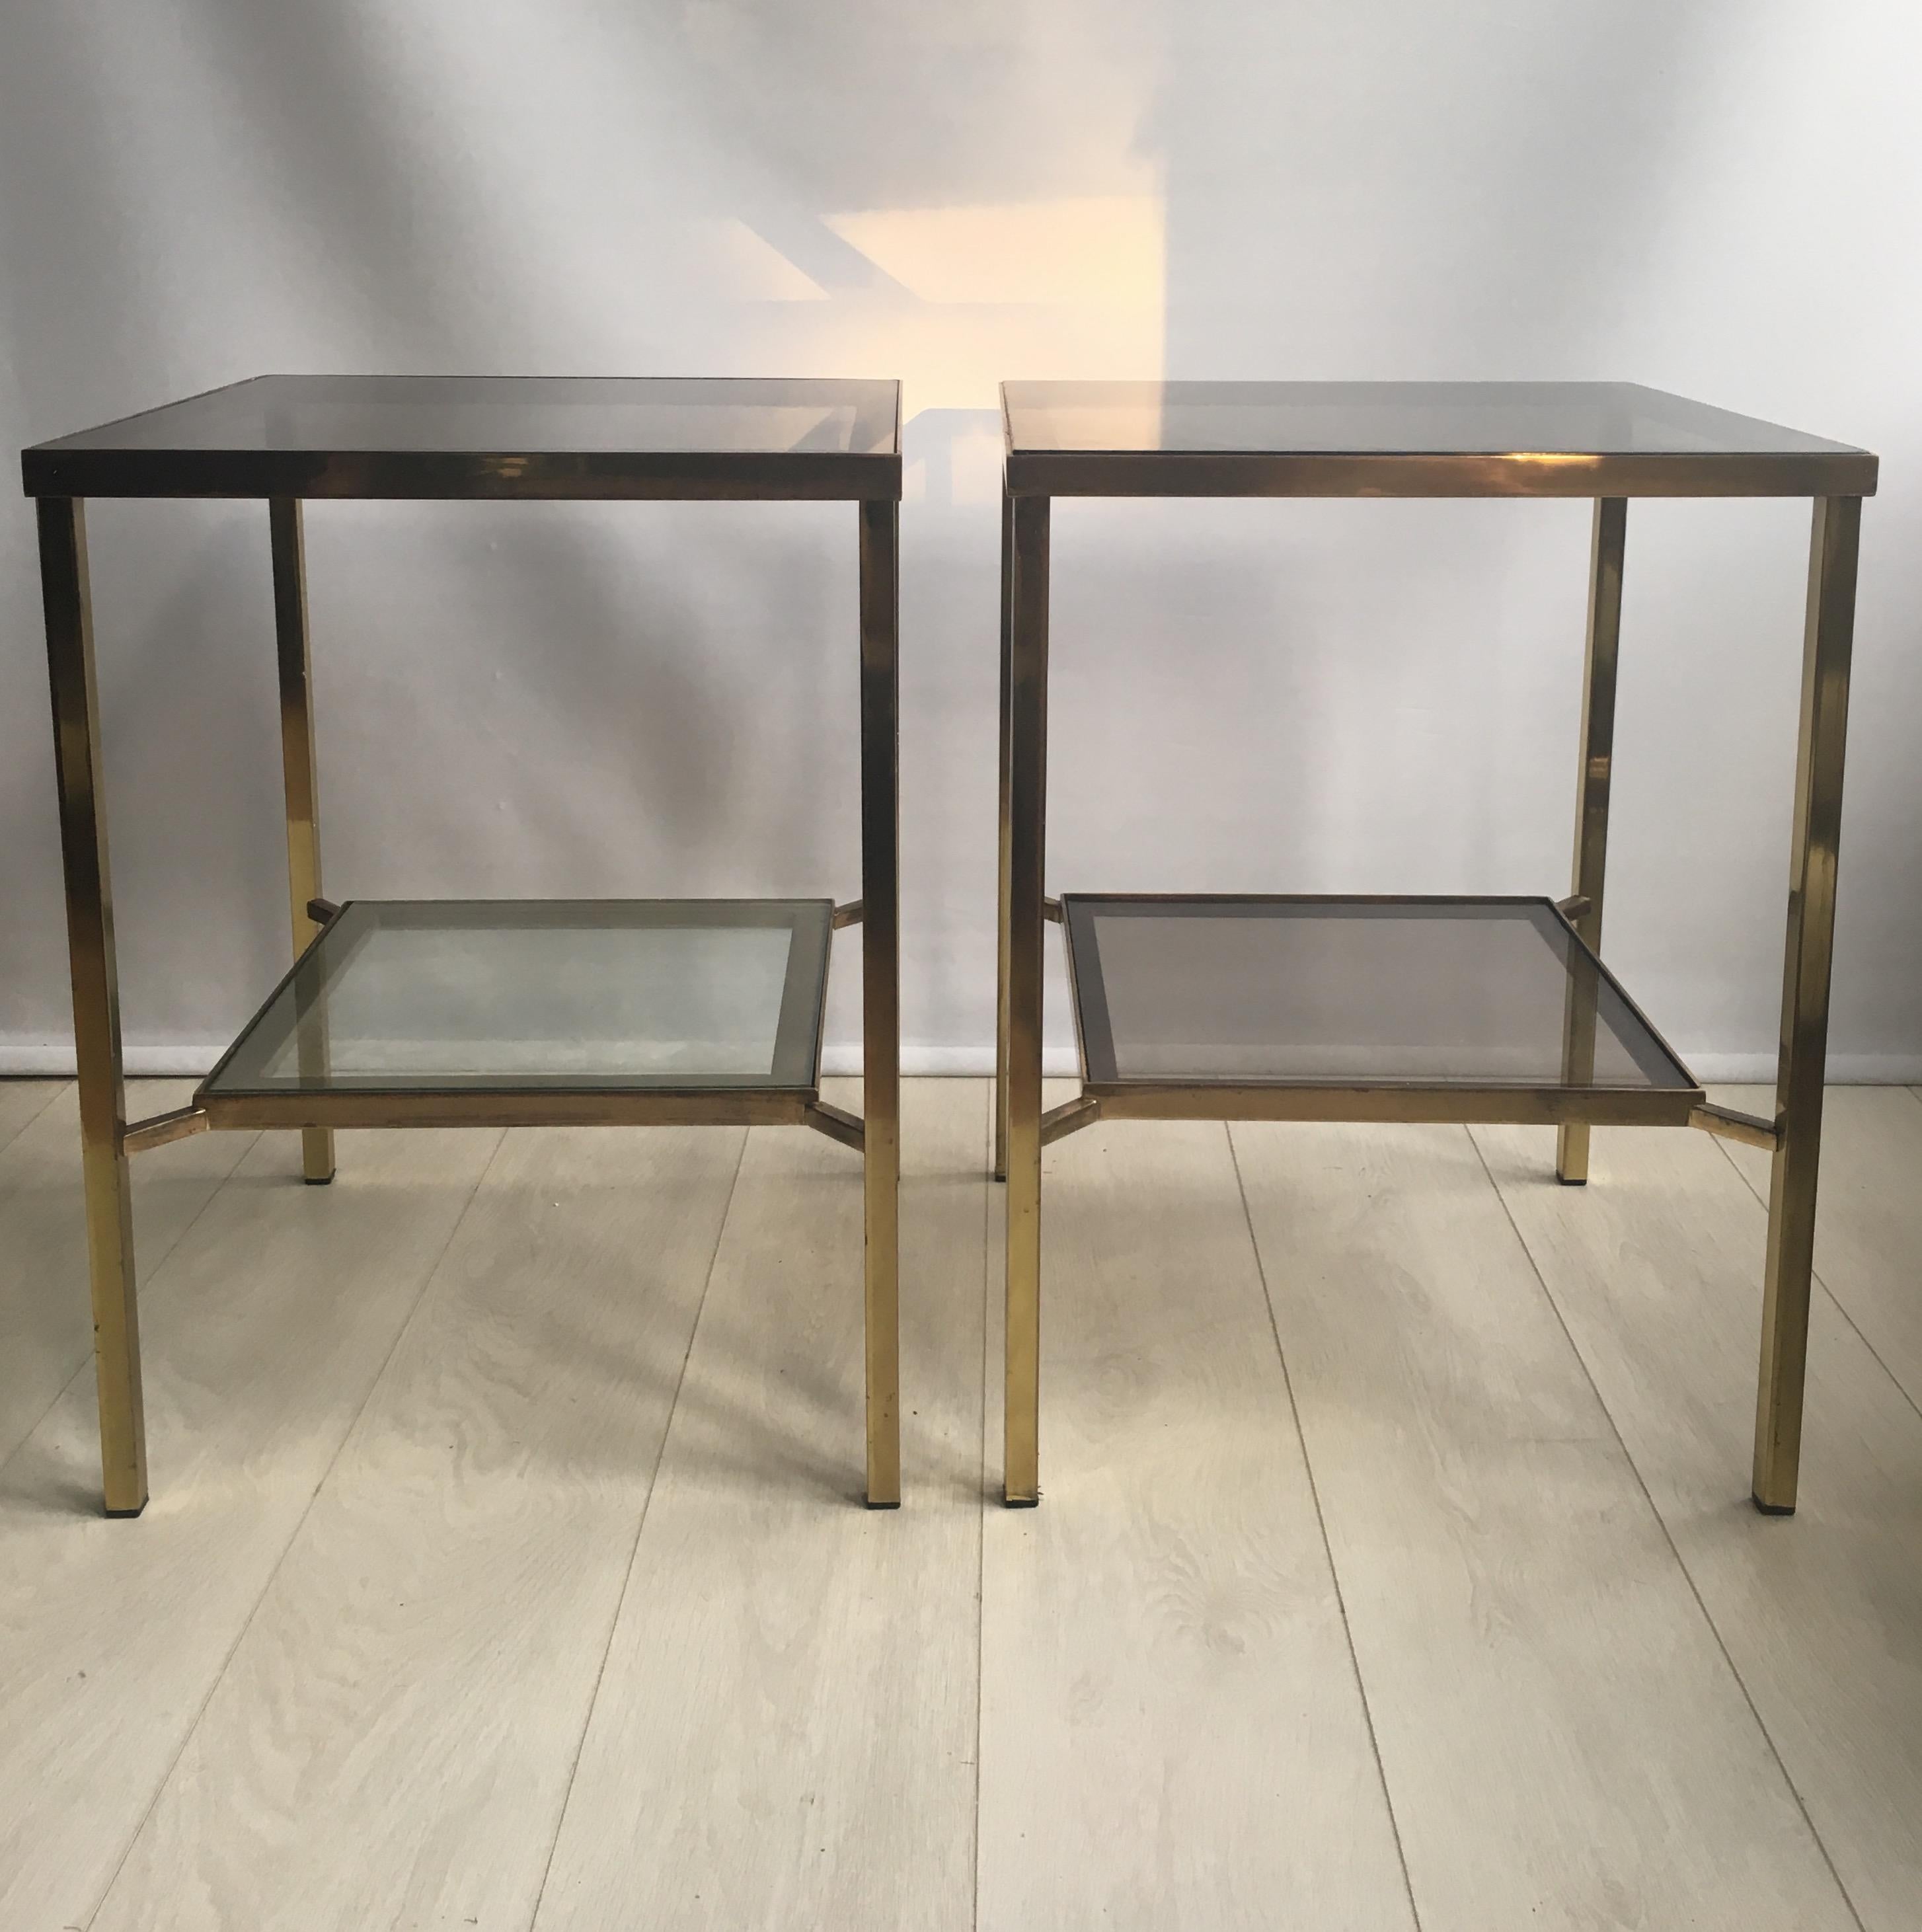 Perfect height side tables with polished brass finish and smoked glass shelves.

Very near pair (the top level is approximate 2mm different between the rims) but not noticeable as per images.

Measures: 61 cm tall, 45.5 cm square.